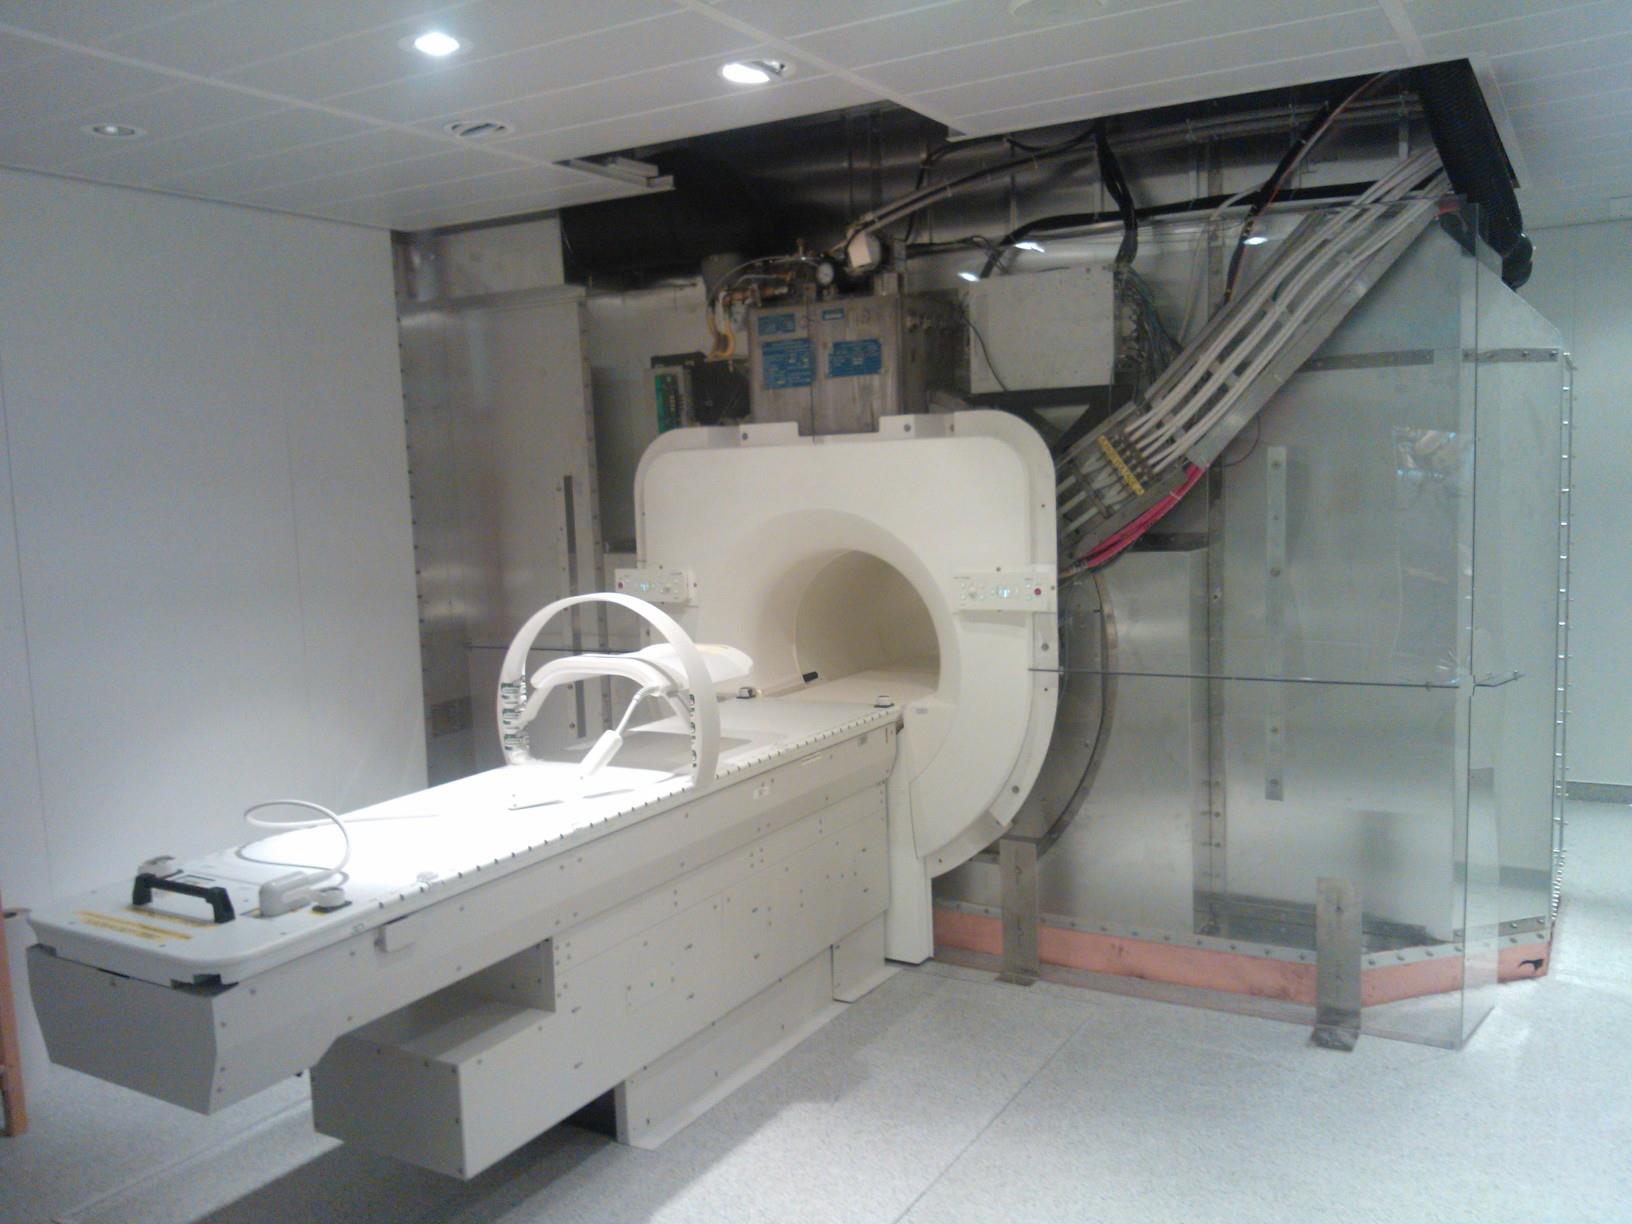 MR-linac behandelcyclus Image acquisition and